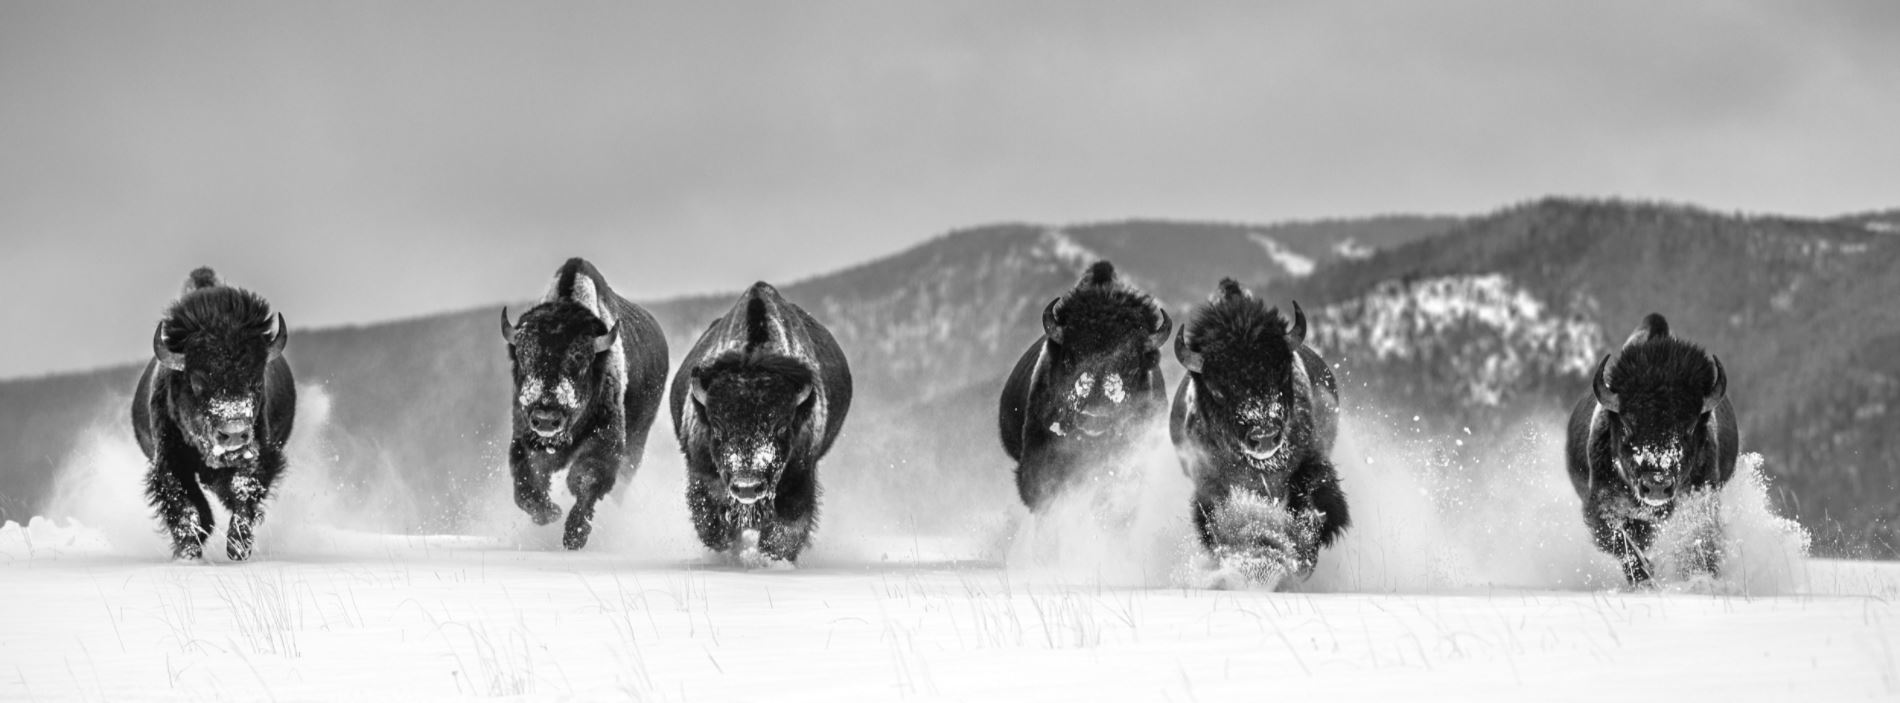 The Bills by David Yarrow, six Bisons running through snow towards the camera